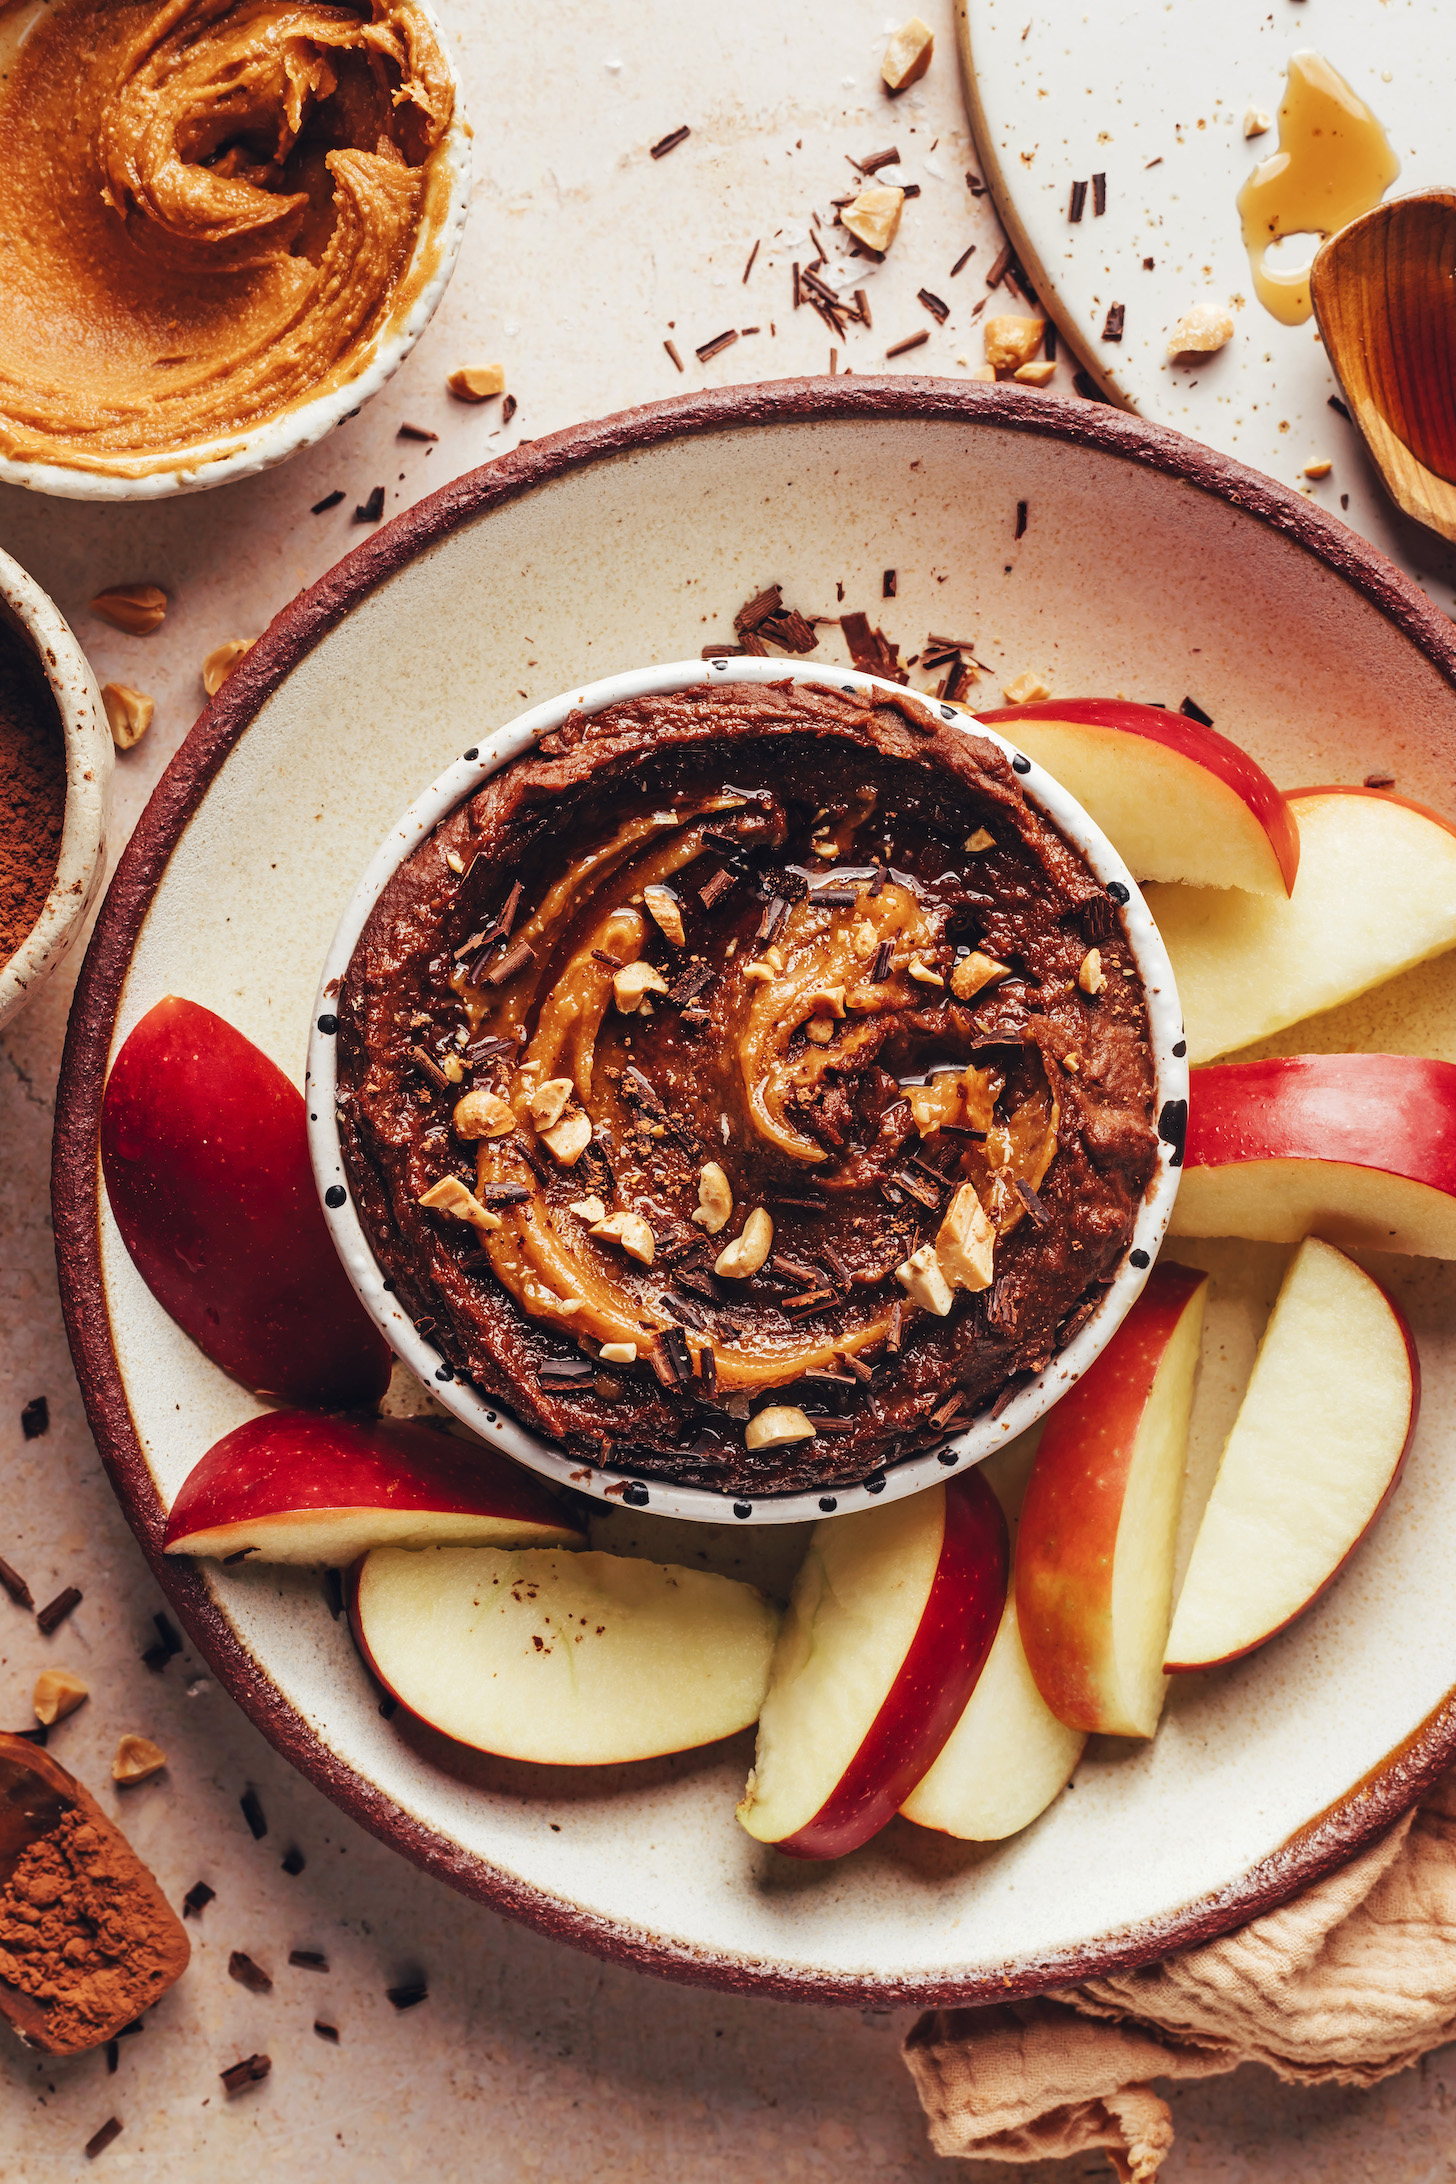 Sliced apples around a bowl of chocolate hummus with a peanut butter swirl